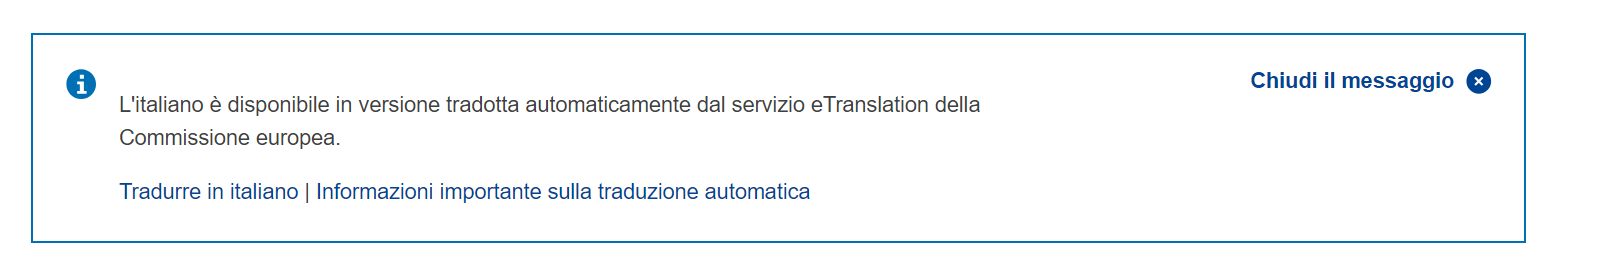 pop up message when you wish to translate into another language. The message is in Italian and informs you that the eTranslation in Italian is available